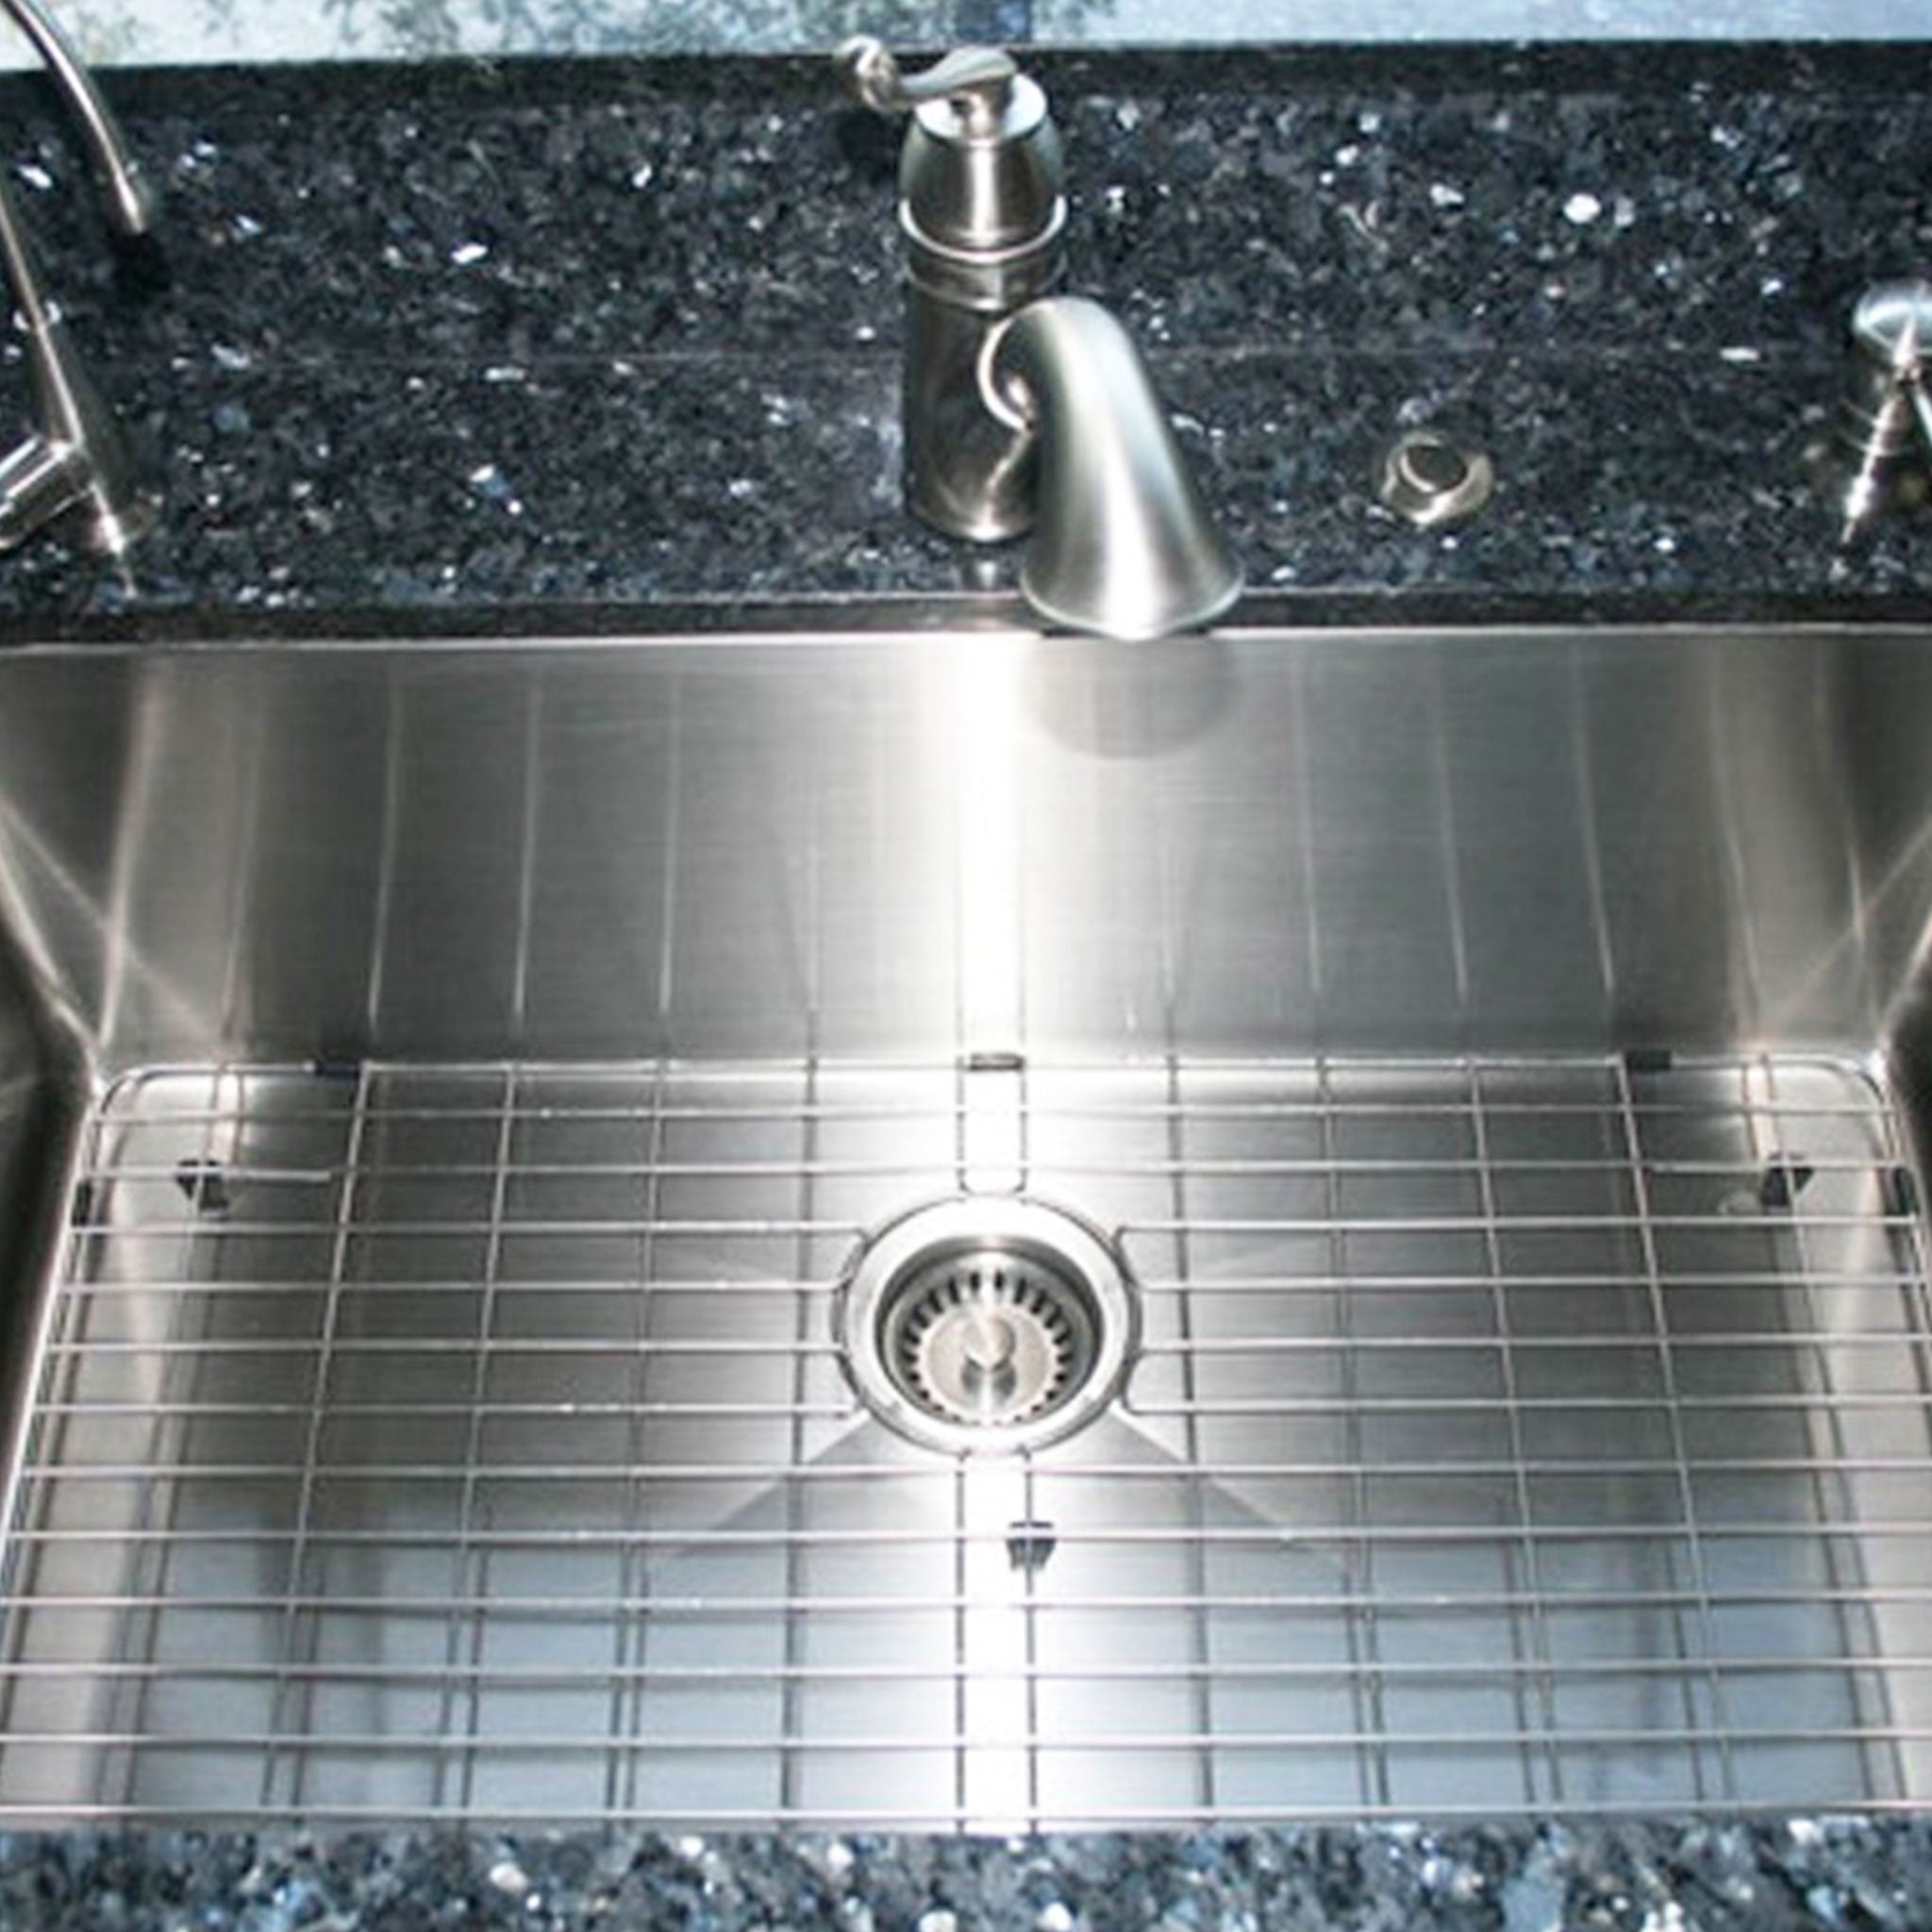 Products GRID - 33" stainless steel sink grid - center drain